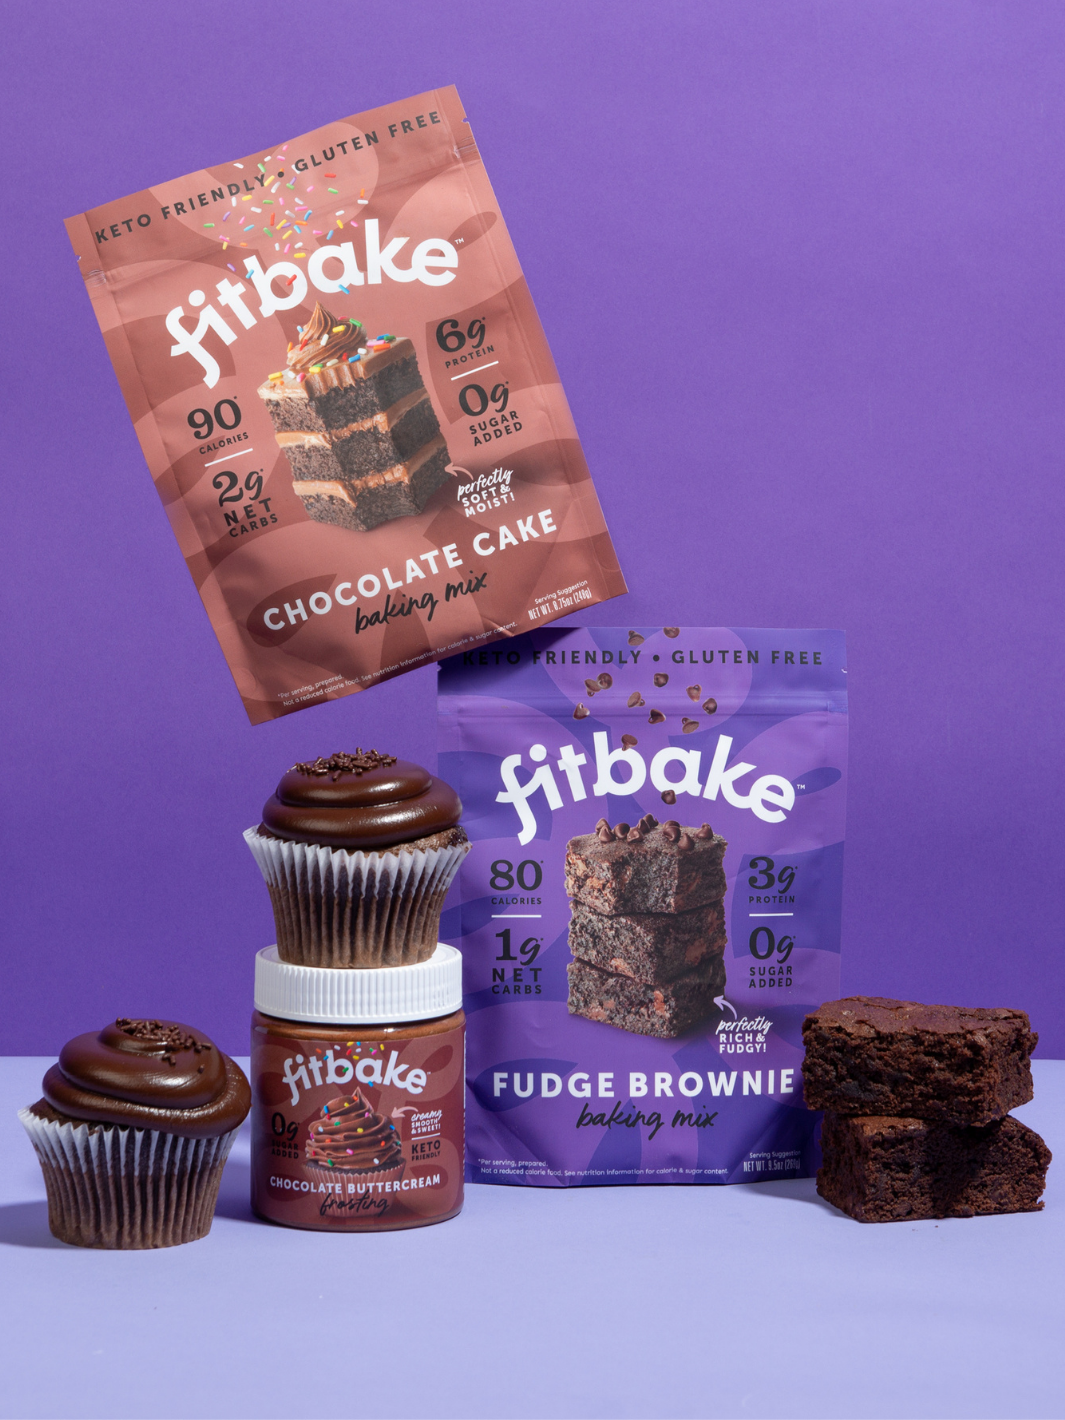 Shop Gift for Keto Dieters, Diabetics, and Chocolate Lovers – GOALZ